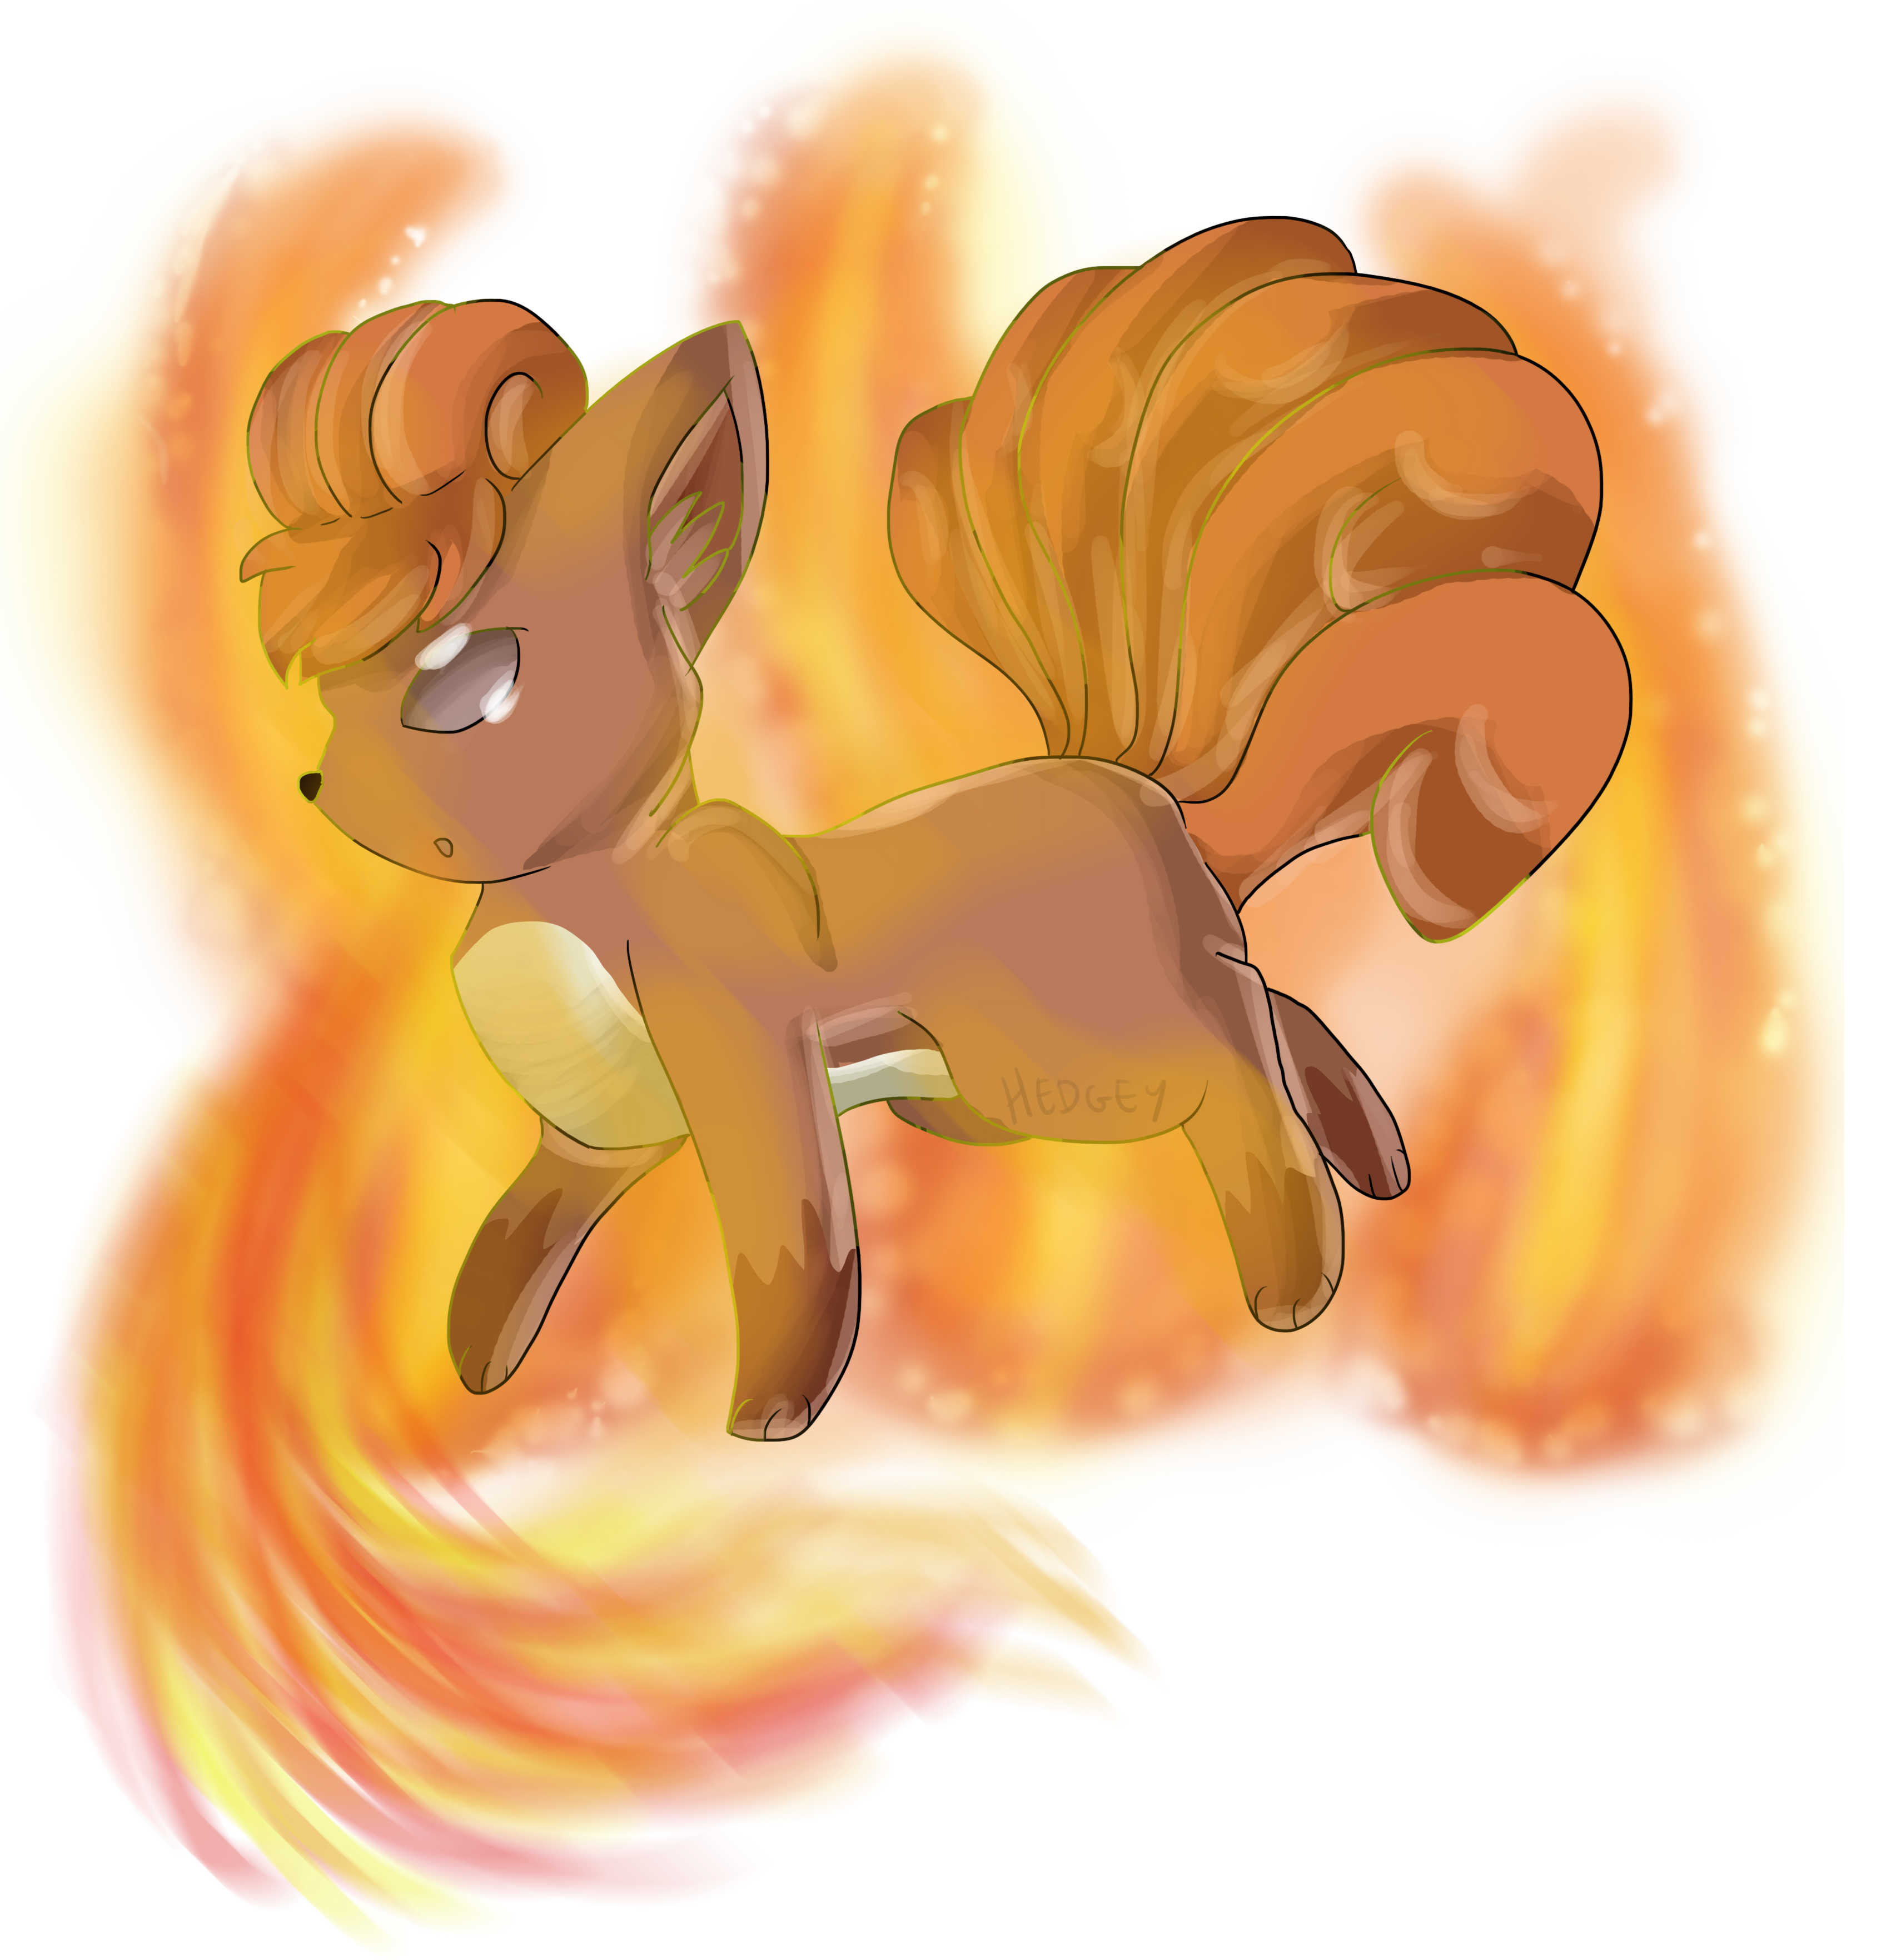 vulpix-used-inferno-by-hedgey